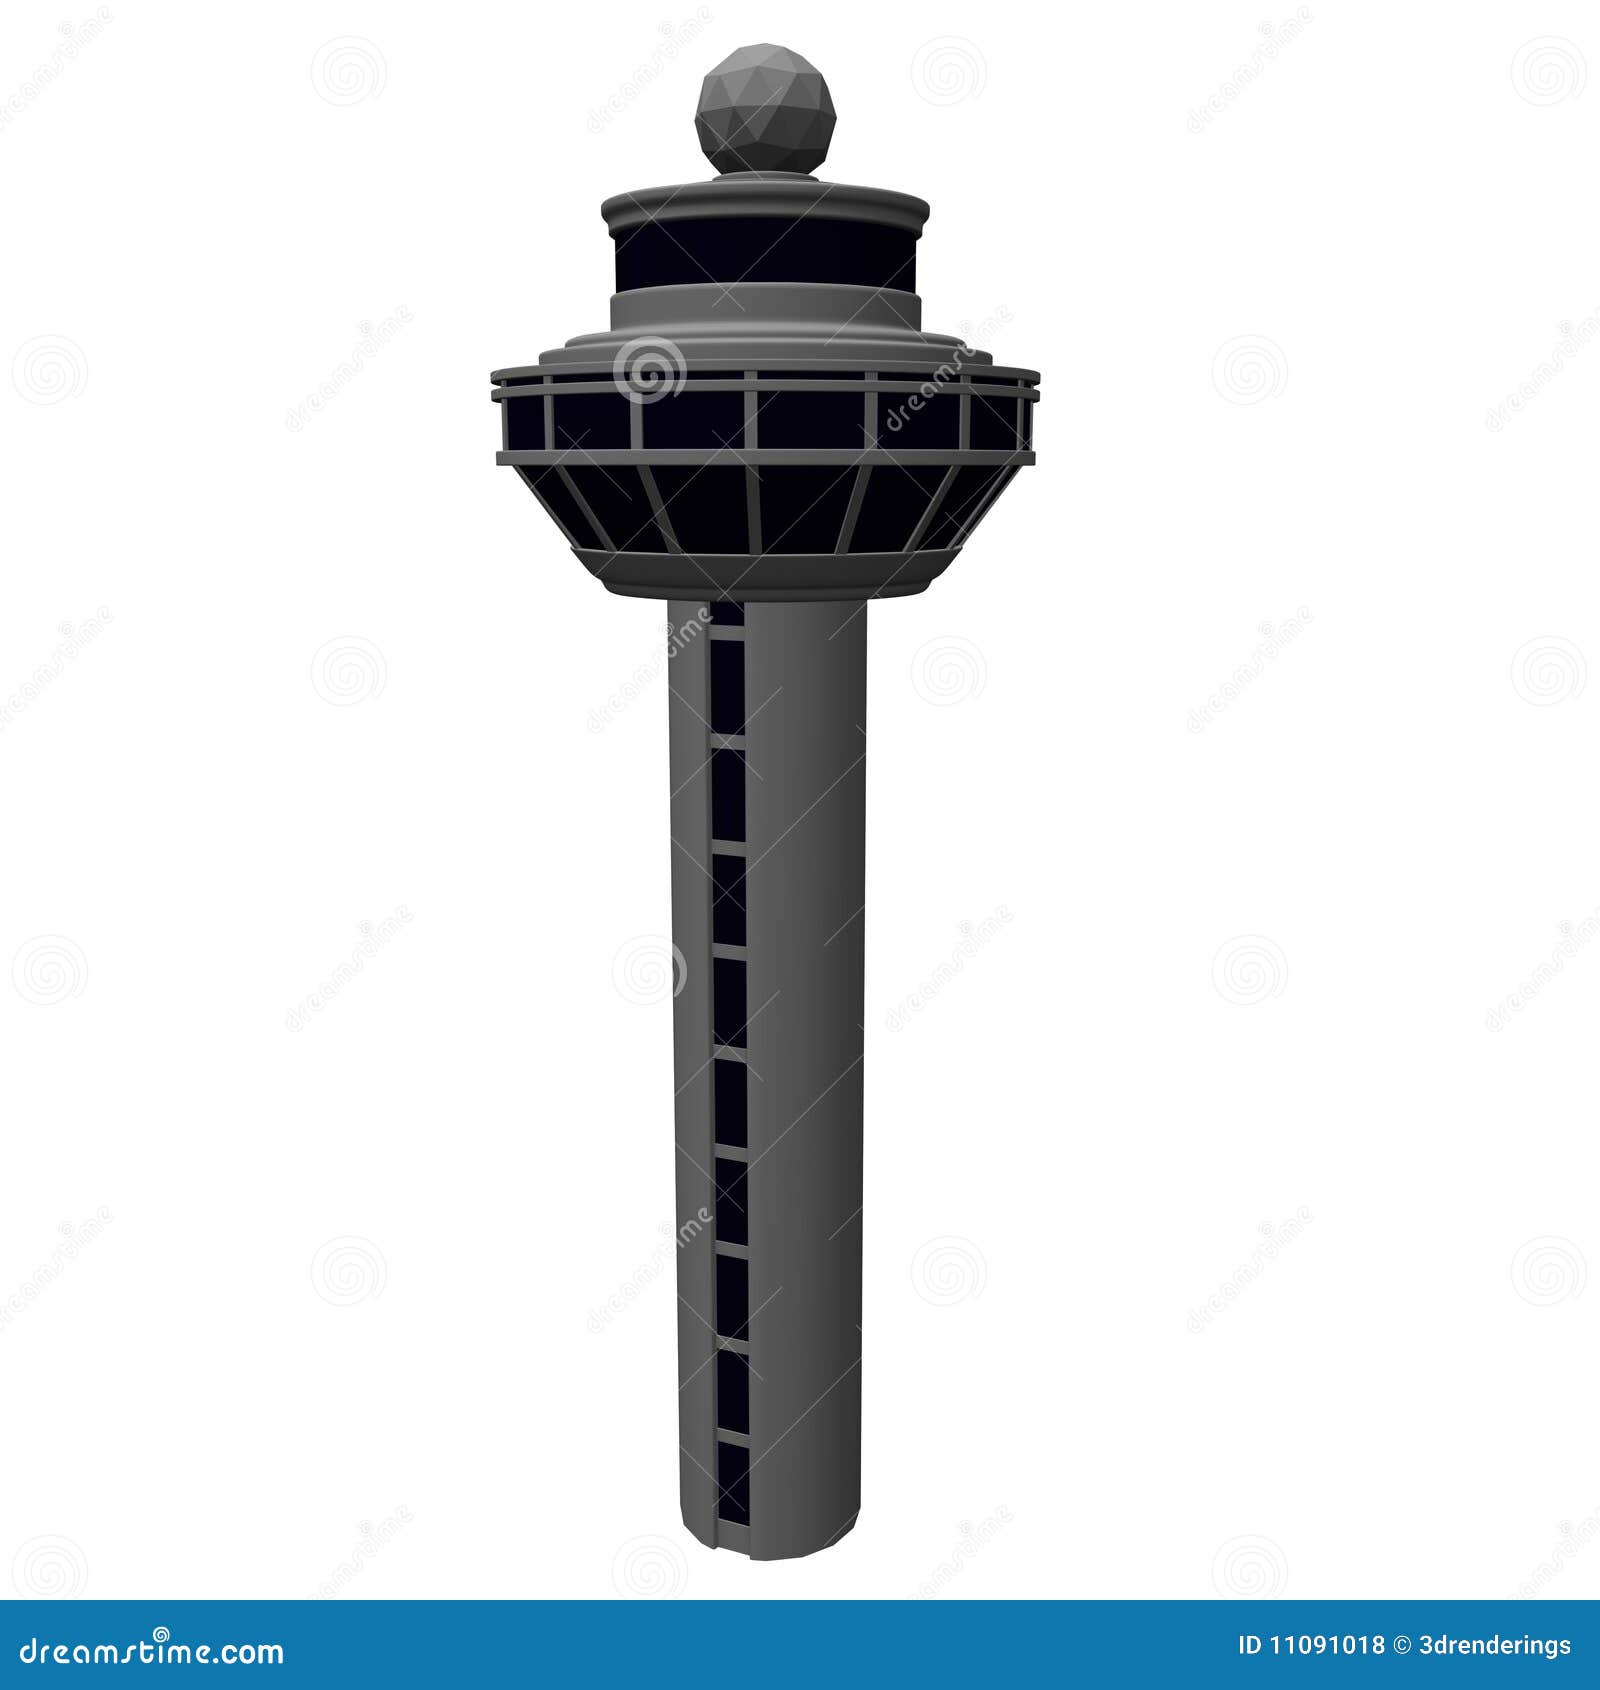 airport building clipart - photo #29